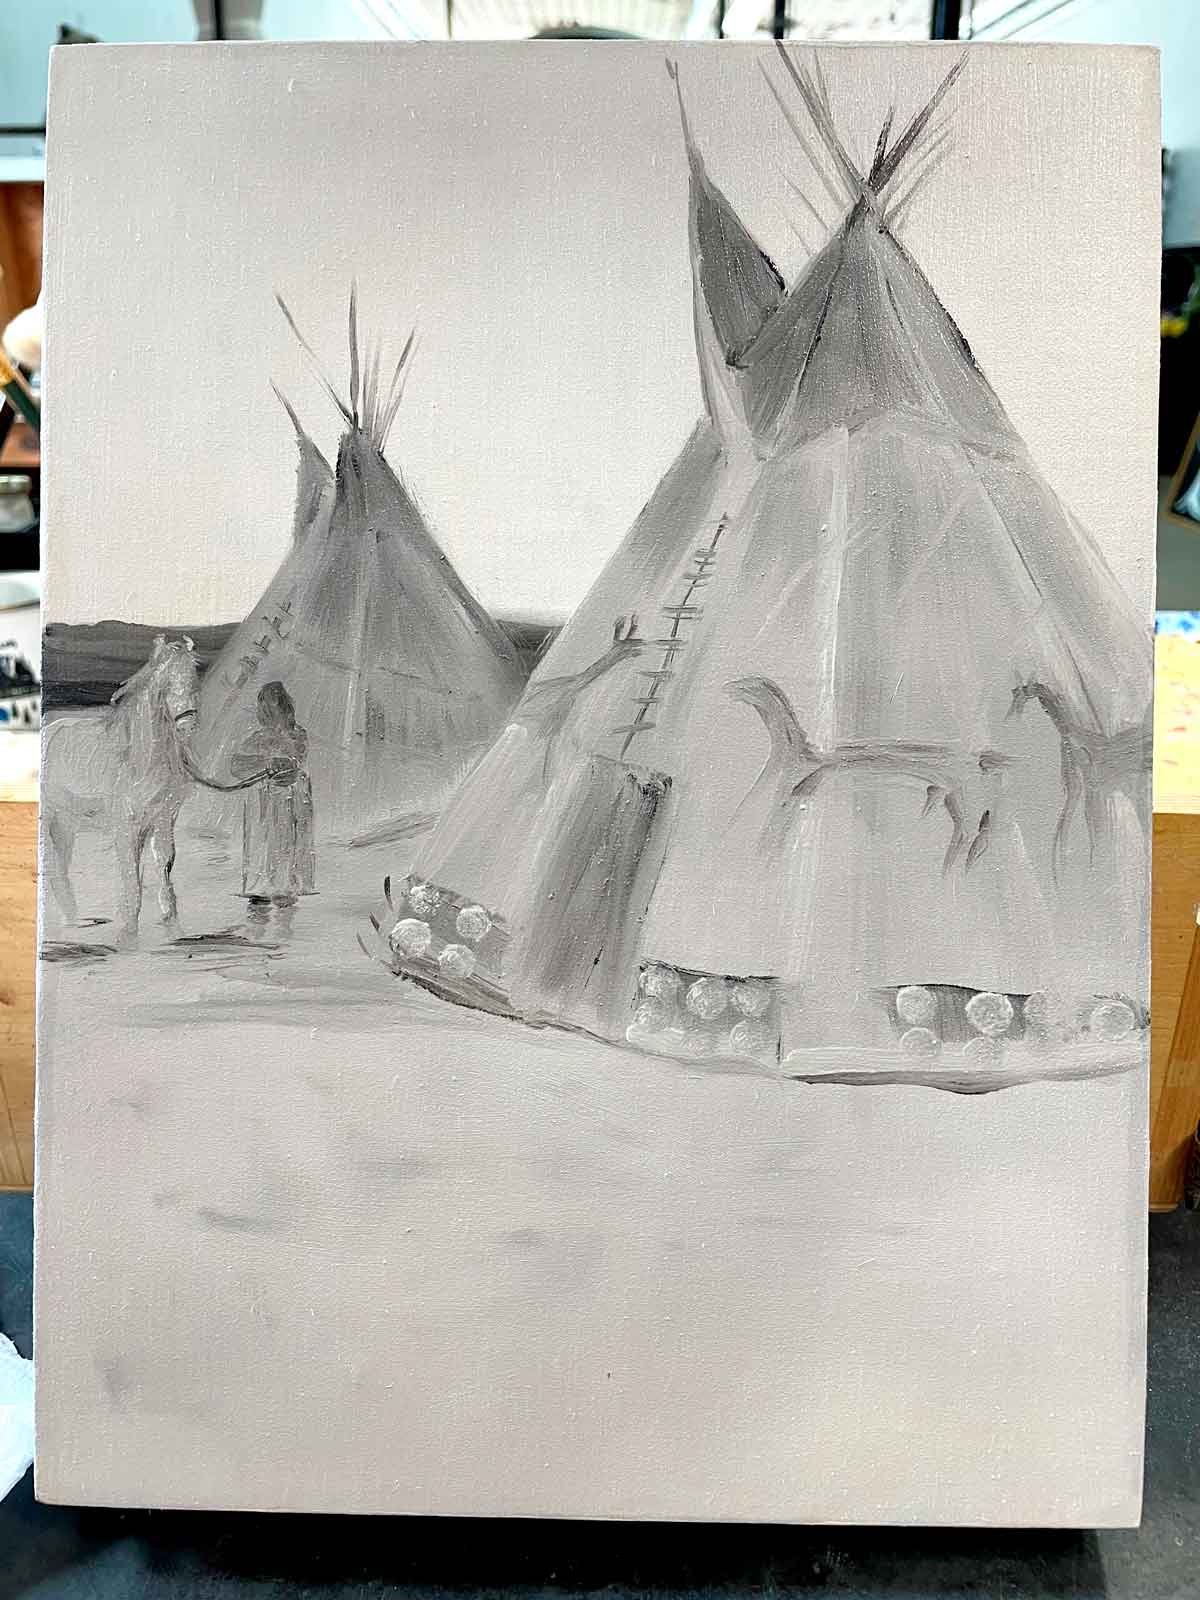 Almost there in this painting of Blackfoot tipis based on a photograph by Edward Curtis.